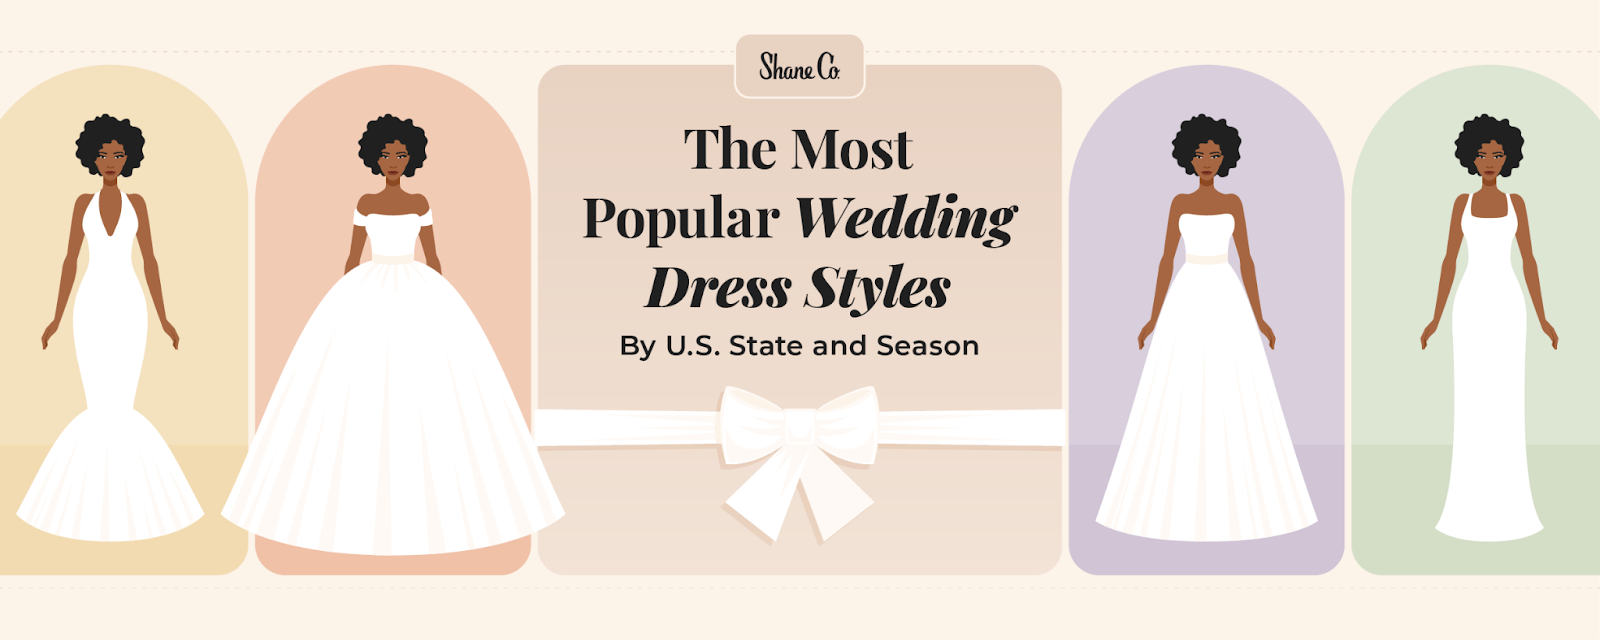 Featured image for the most popular wedding dress styles in the U.S.